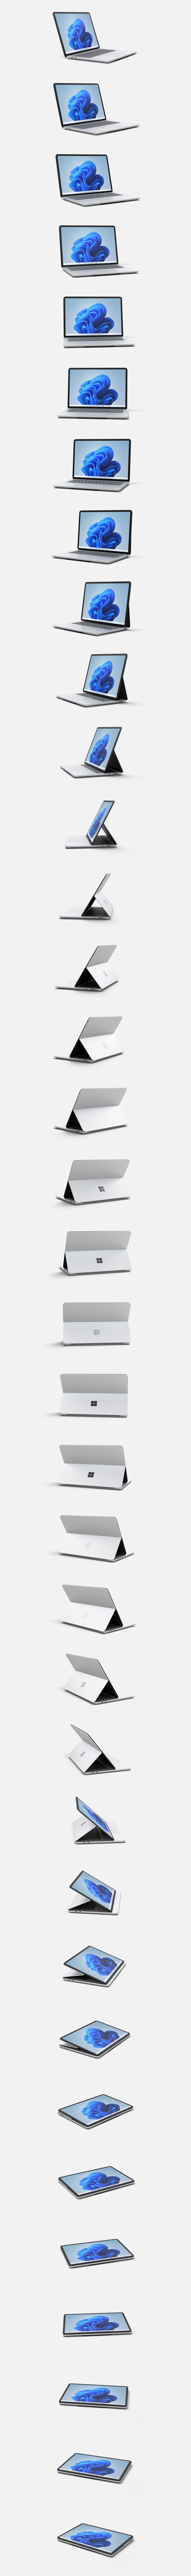 Surface Laptop Studio for Business.